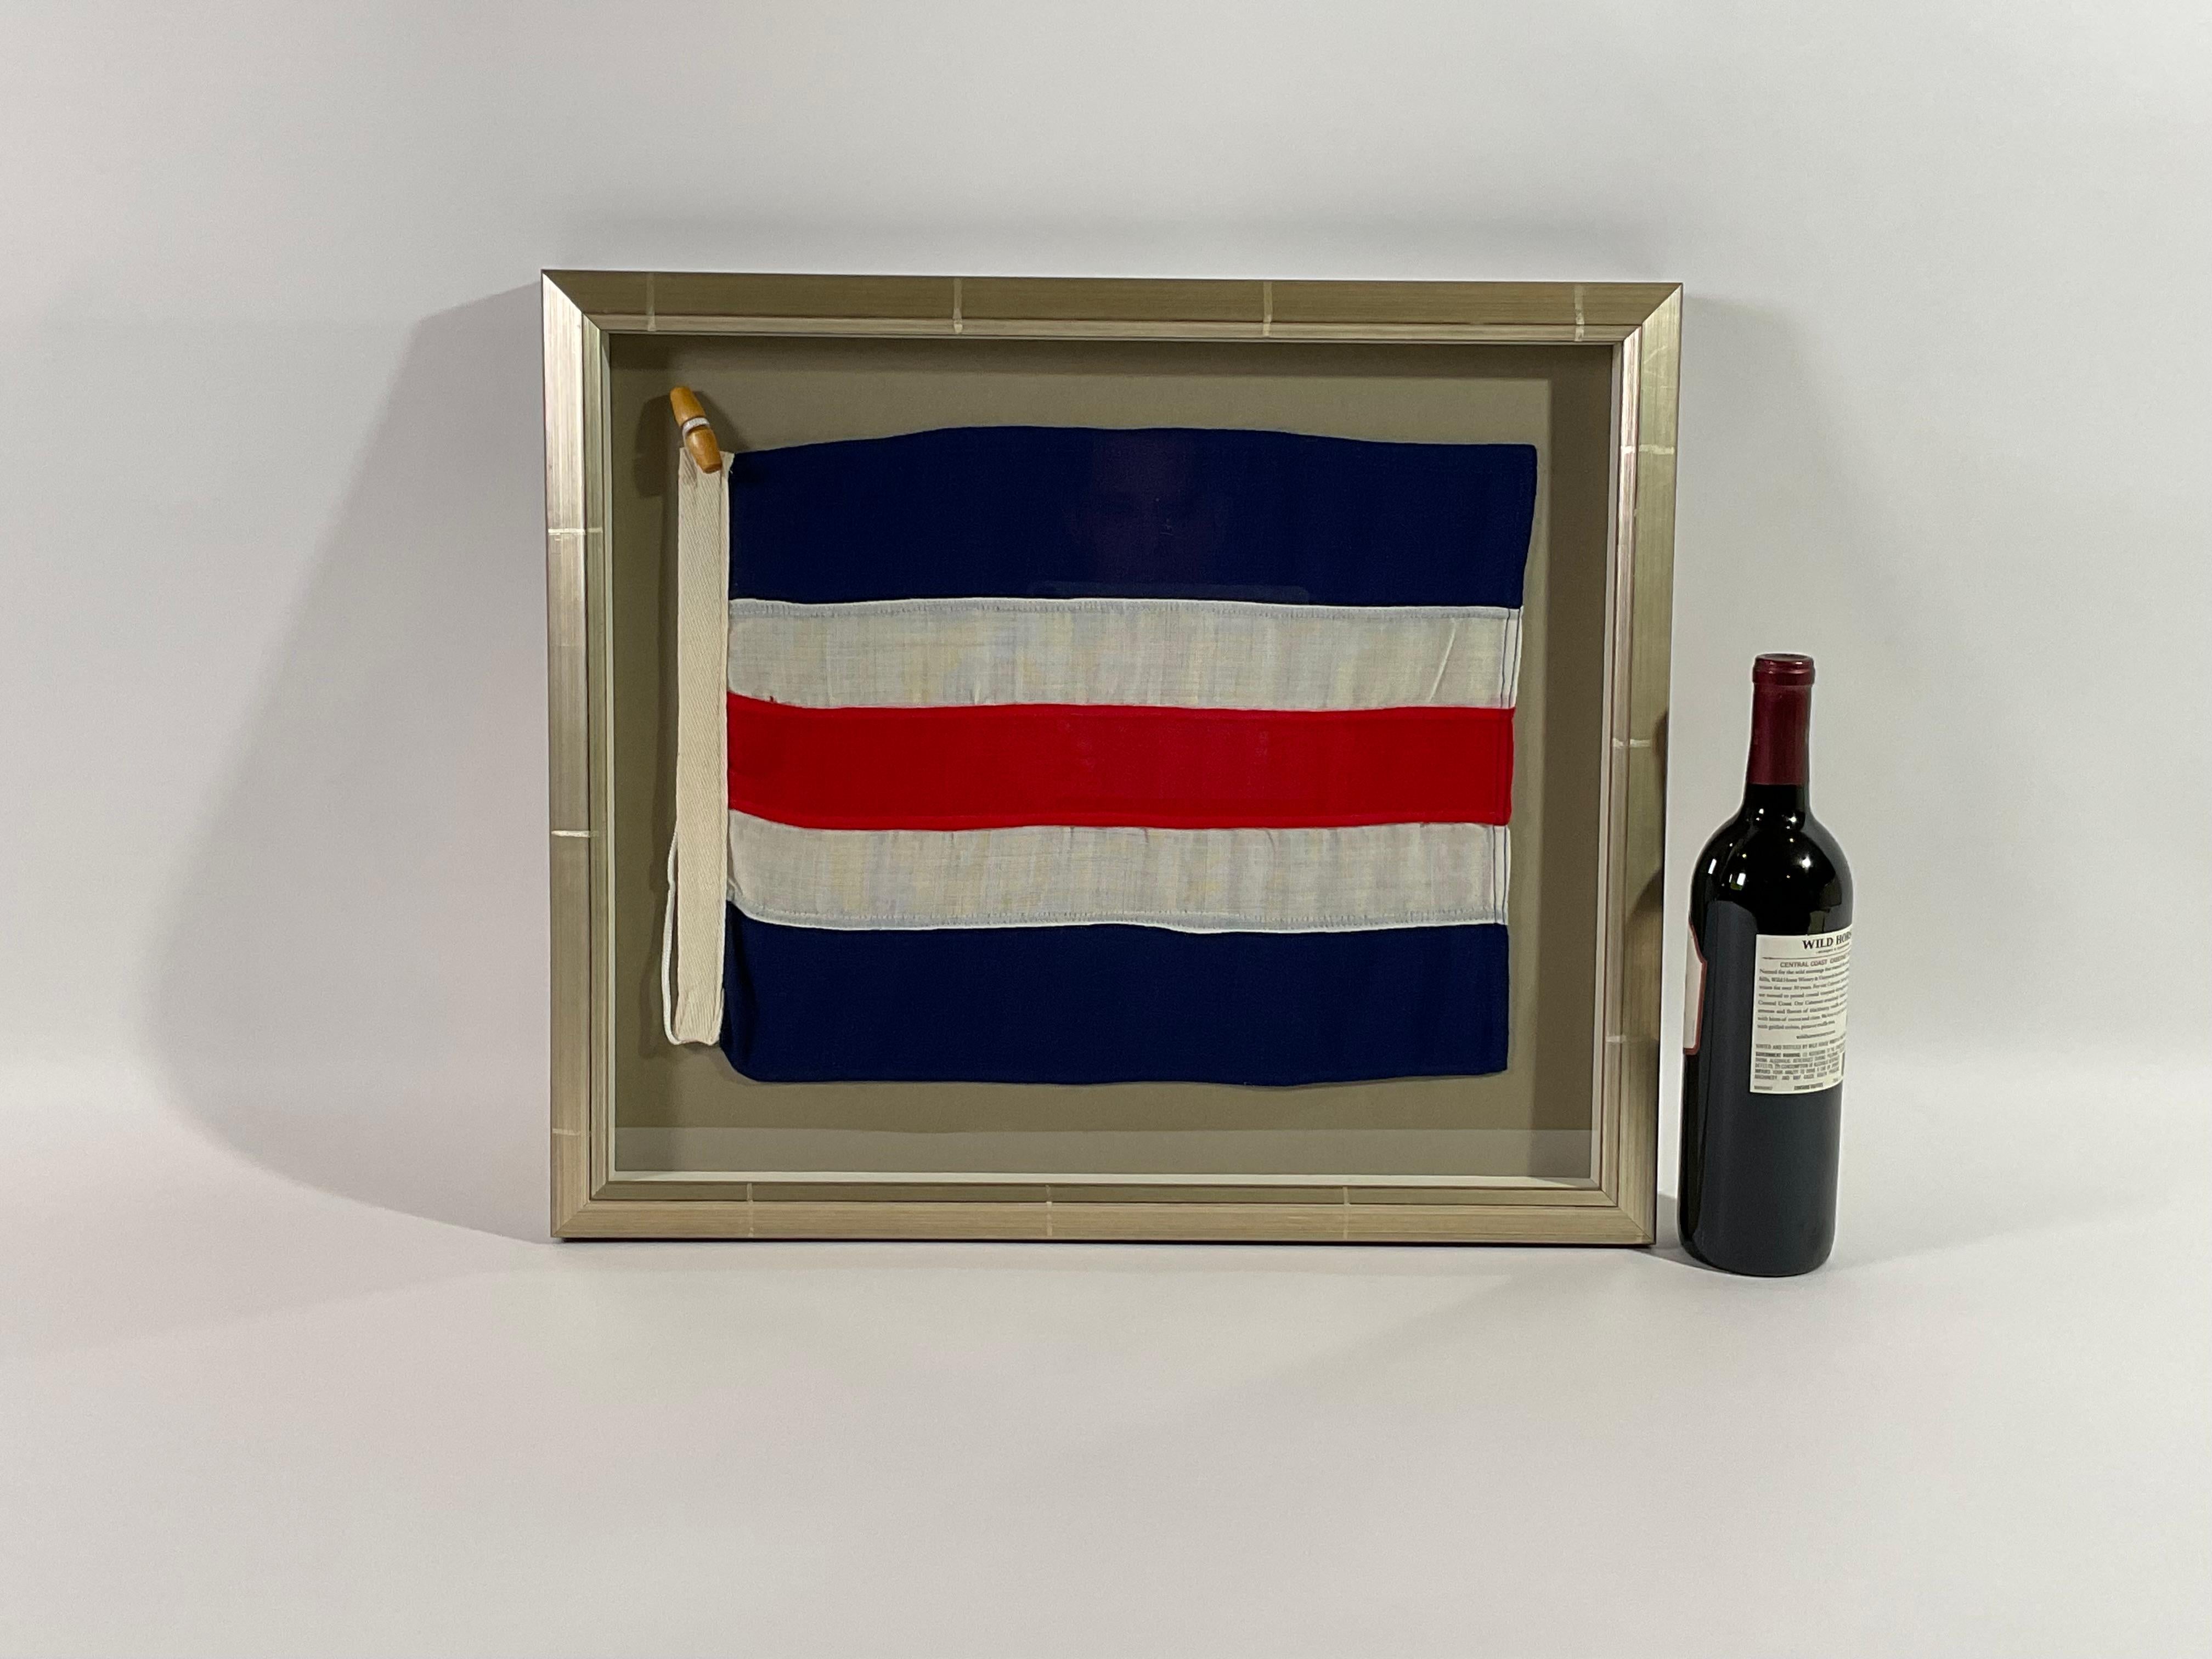 Framed maritime signal flag representing the letter “C” in the international code of signals.  This cotton signal pennant is made of individual stitched panels of red, white and blue with a strong canvas hoist band and original rope with wood